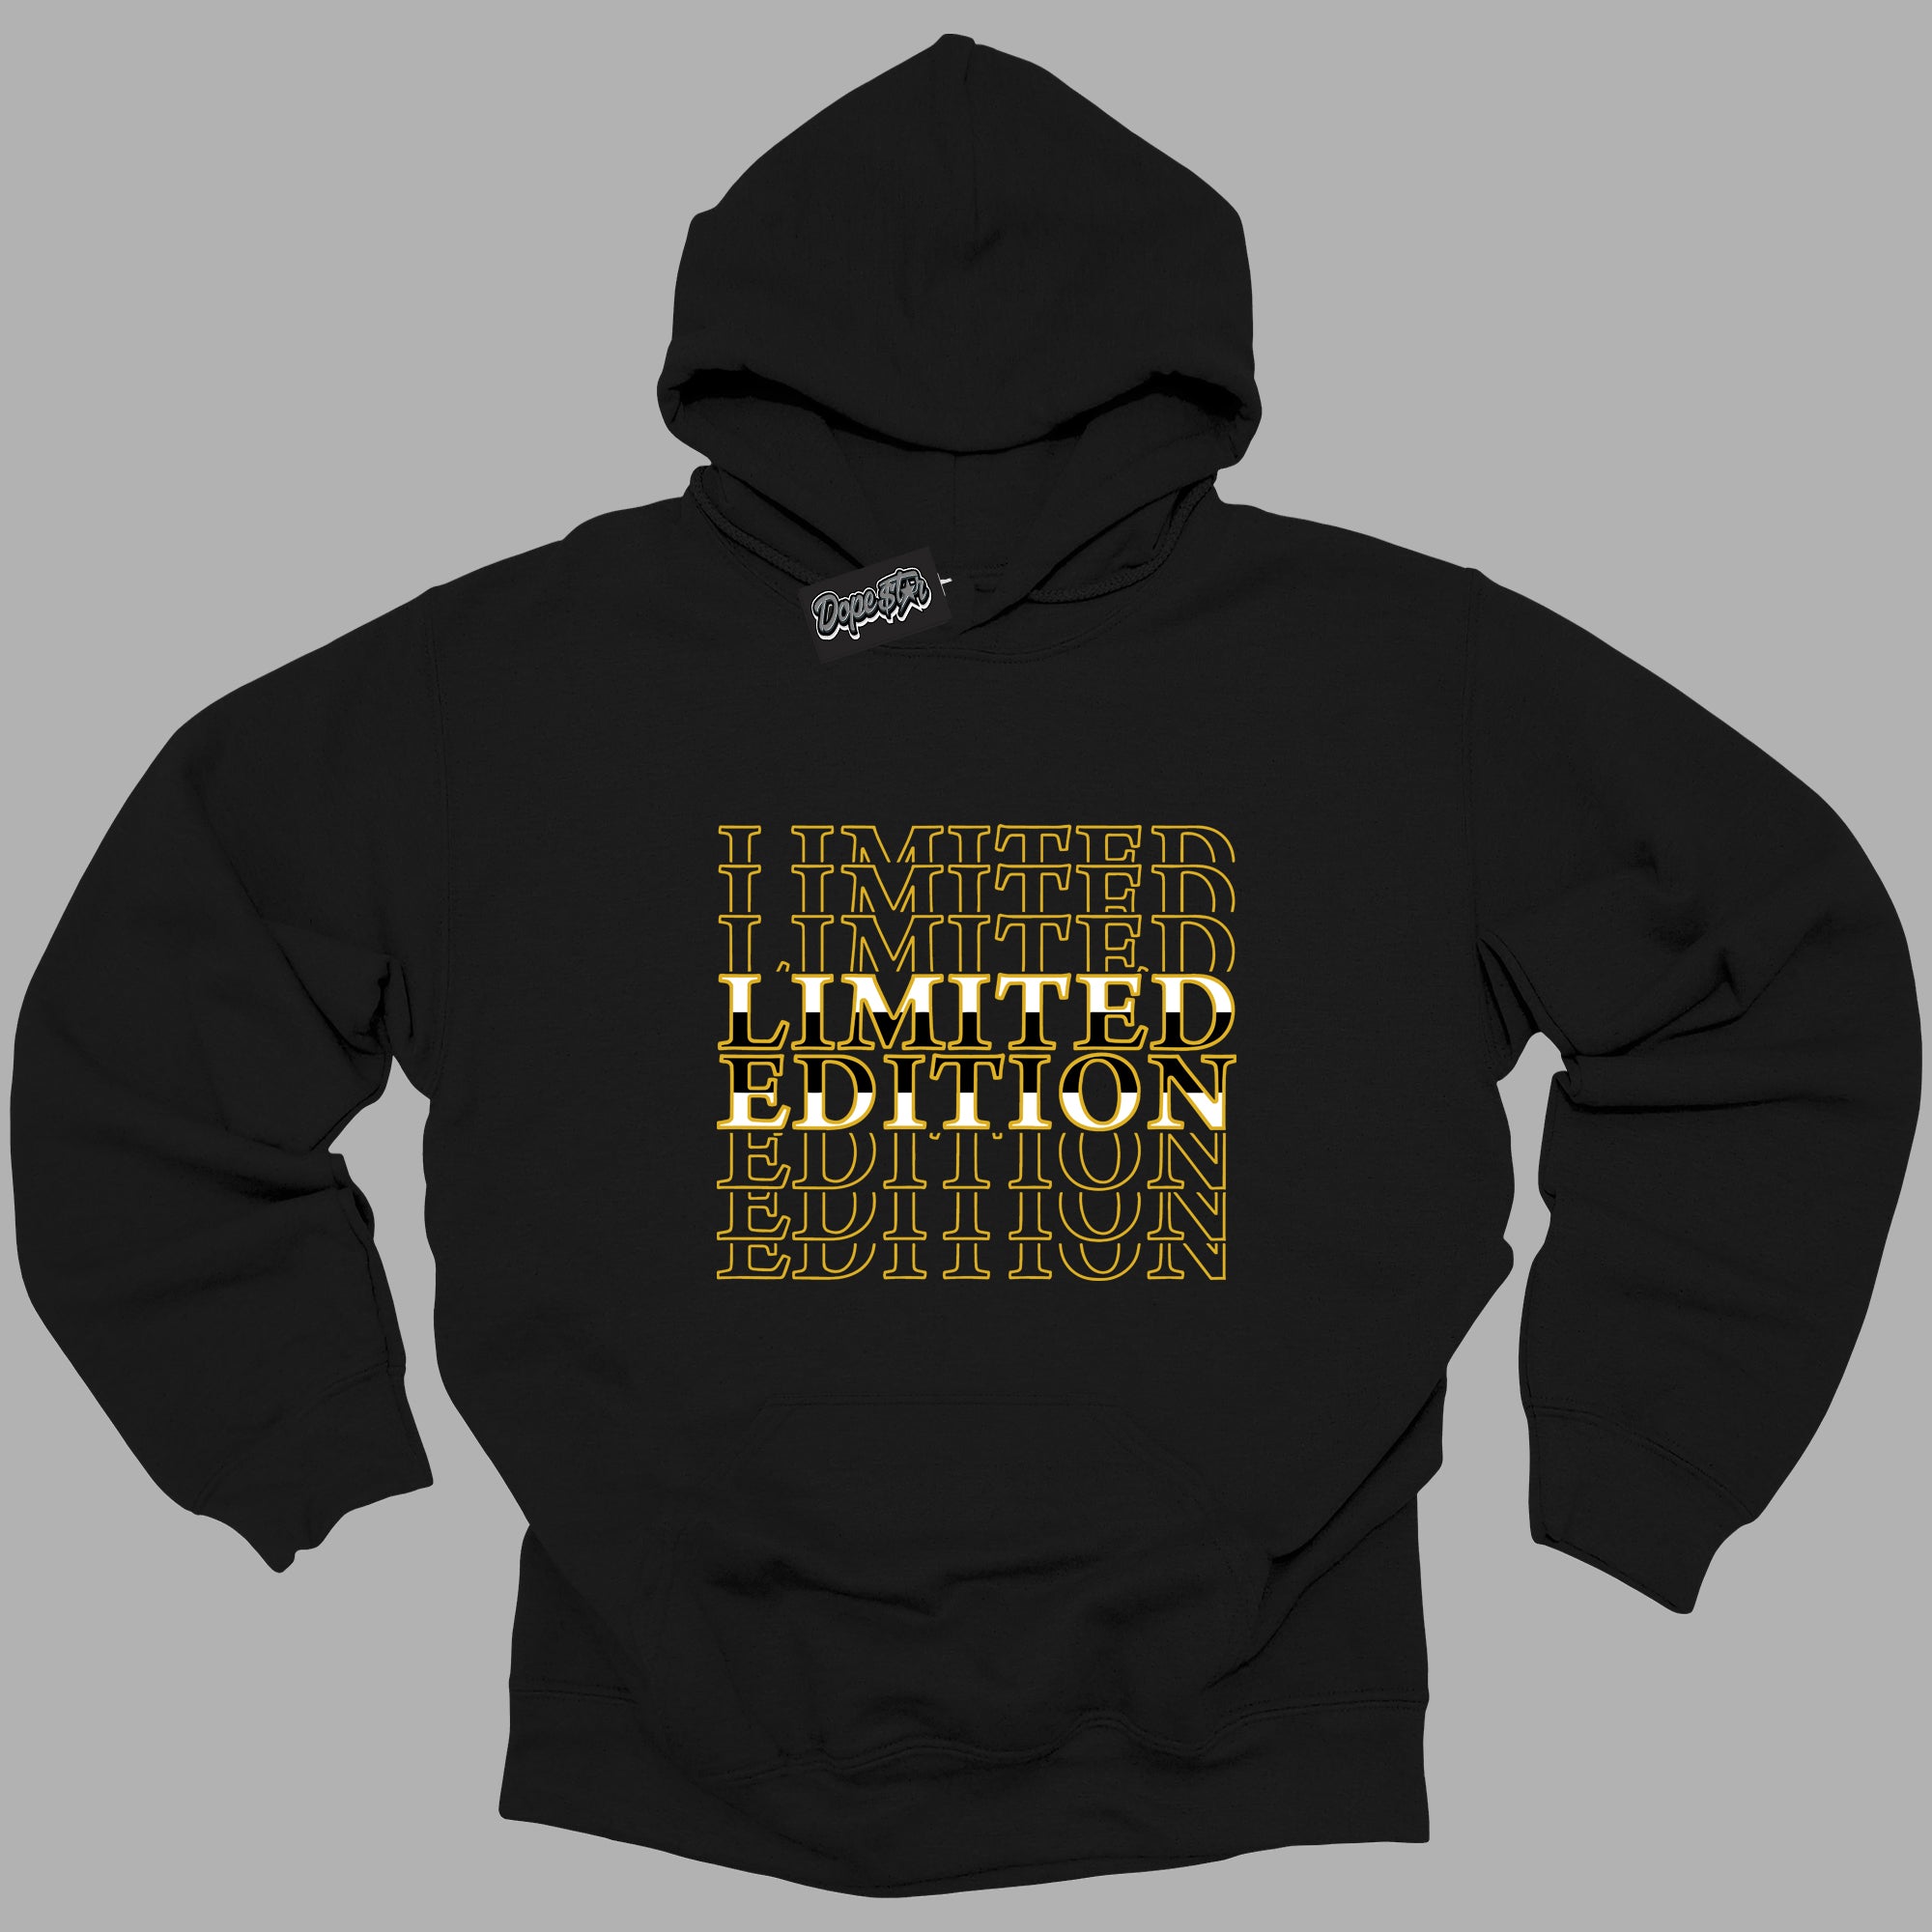 Cool Black Hoodie with “Limited Edition ”  design that Perfectly Matches Yellow Ochre 6s Sneakers.